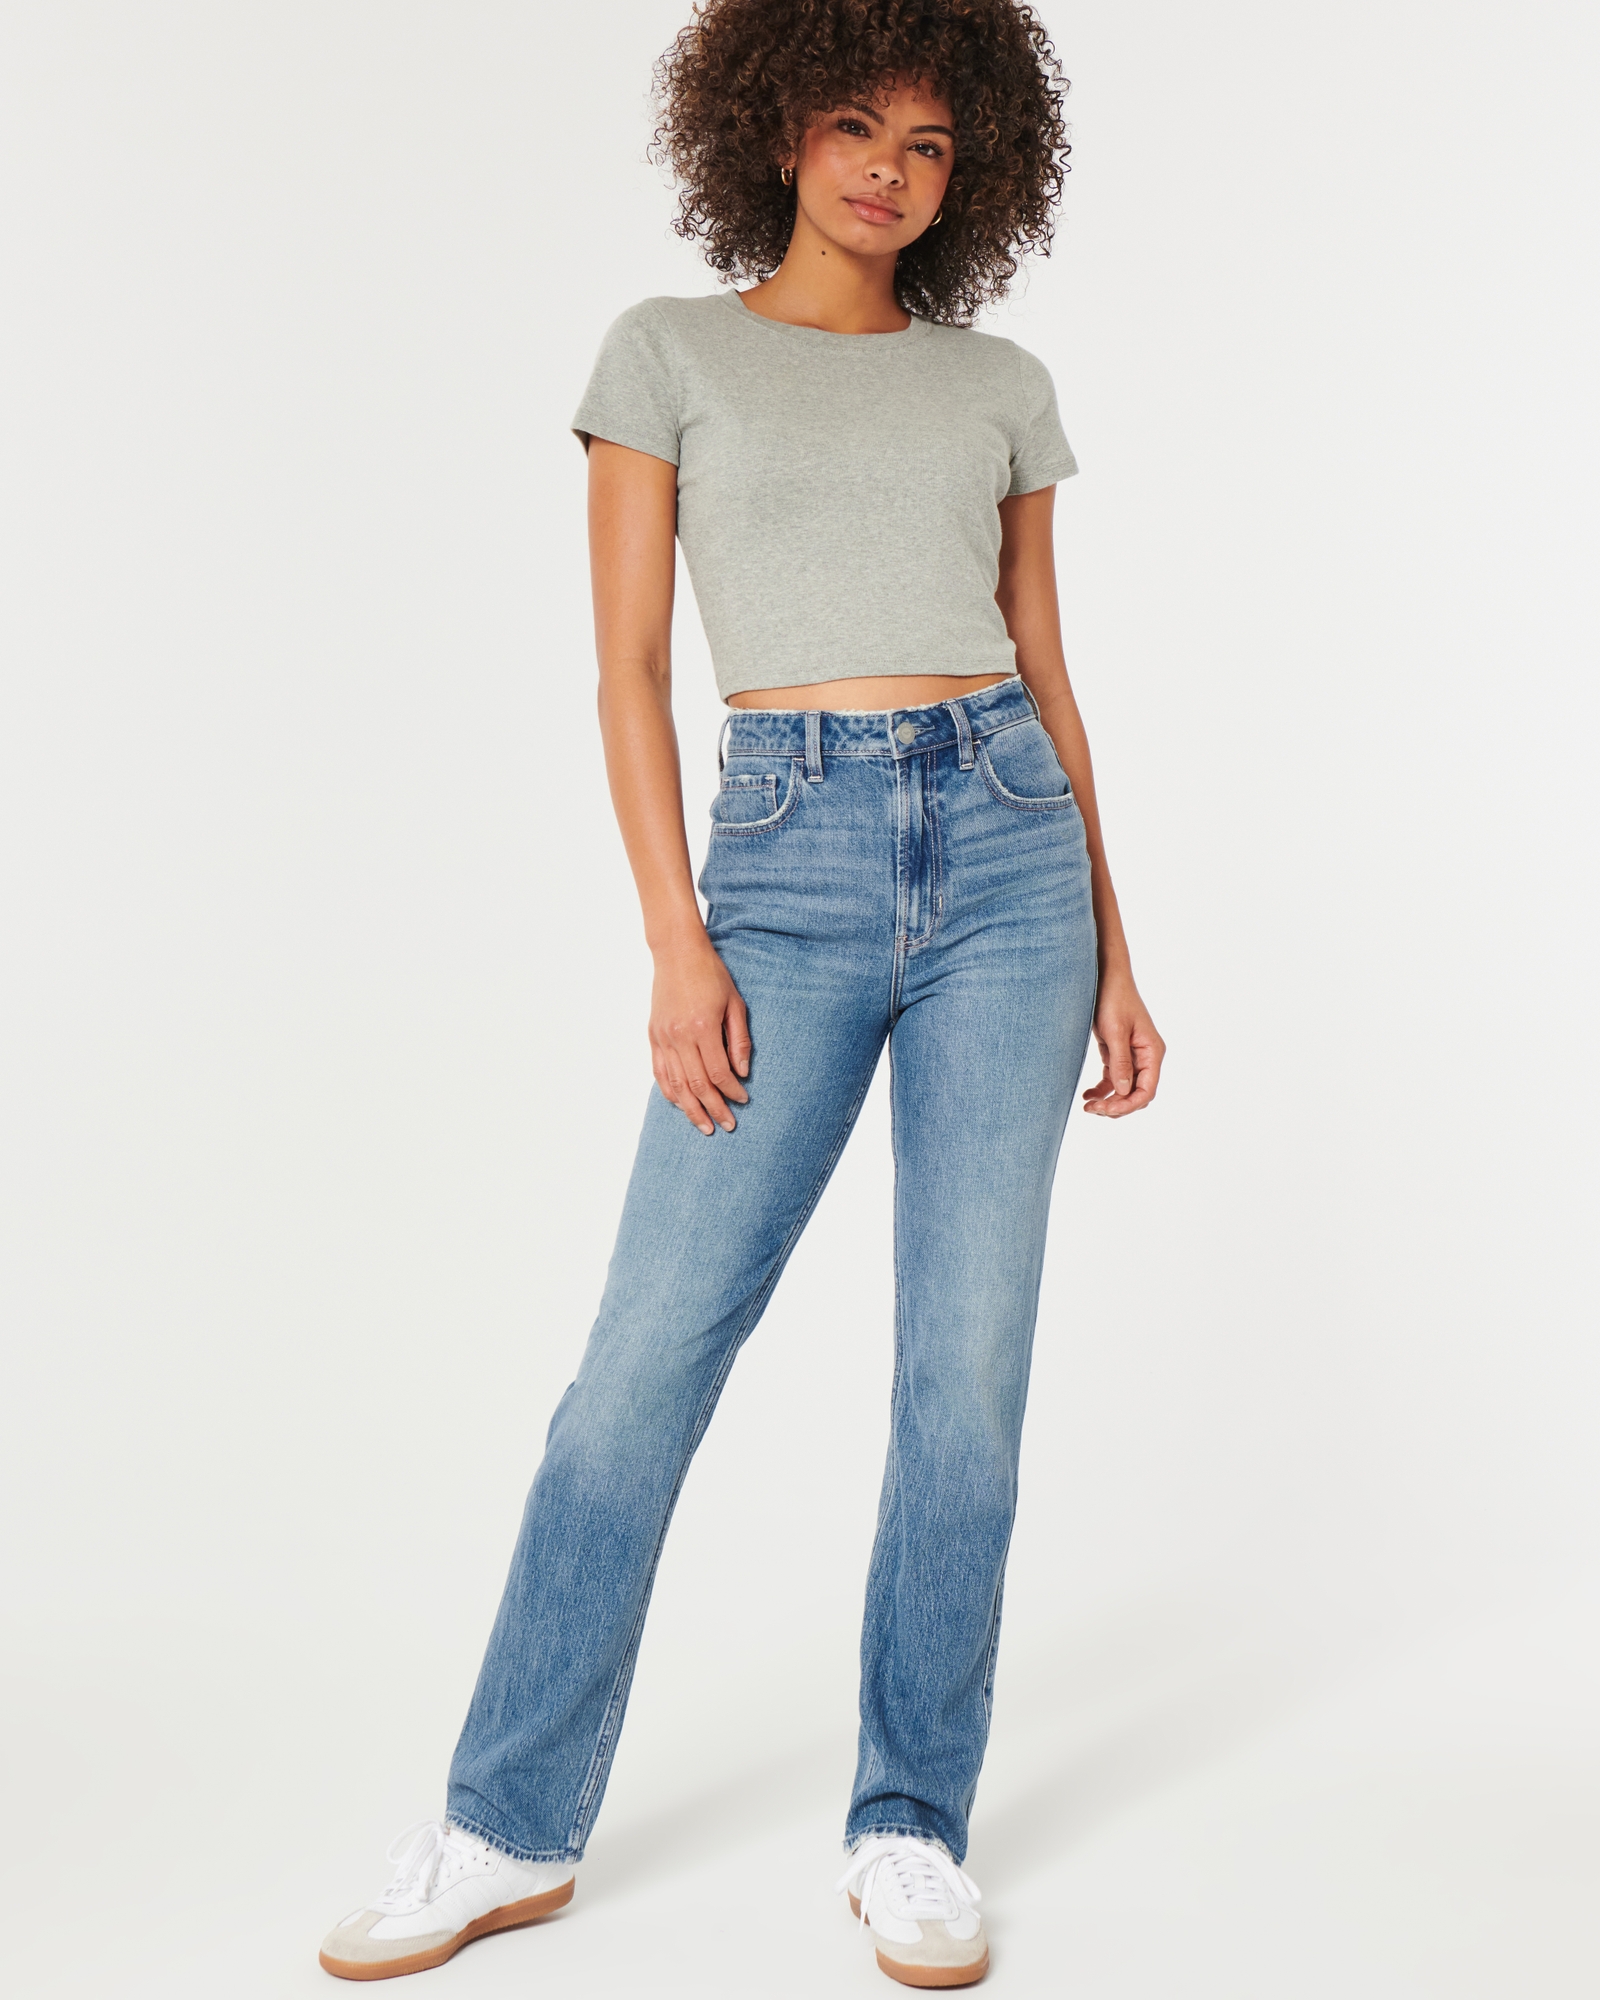 https://img.hollisterco.com/is/image/anf/KIC_355-3326-6773-279_model1.jpg?policy=product-extra-large